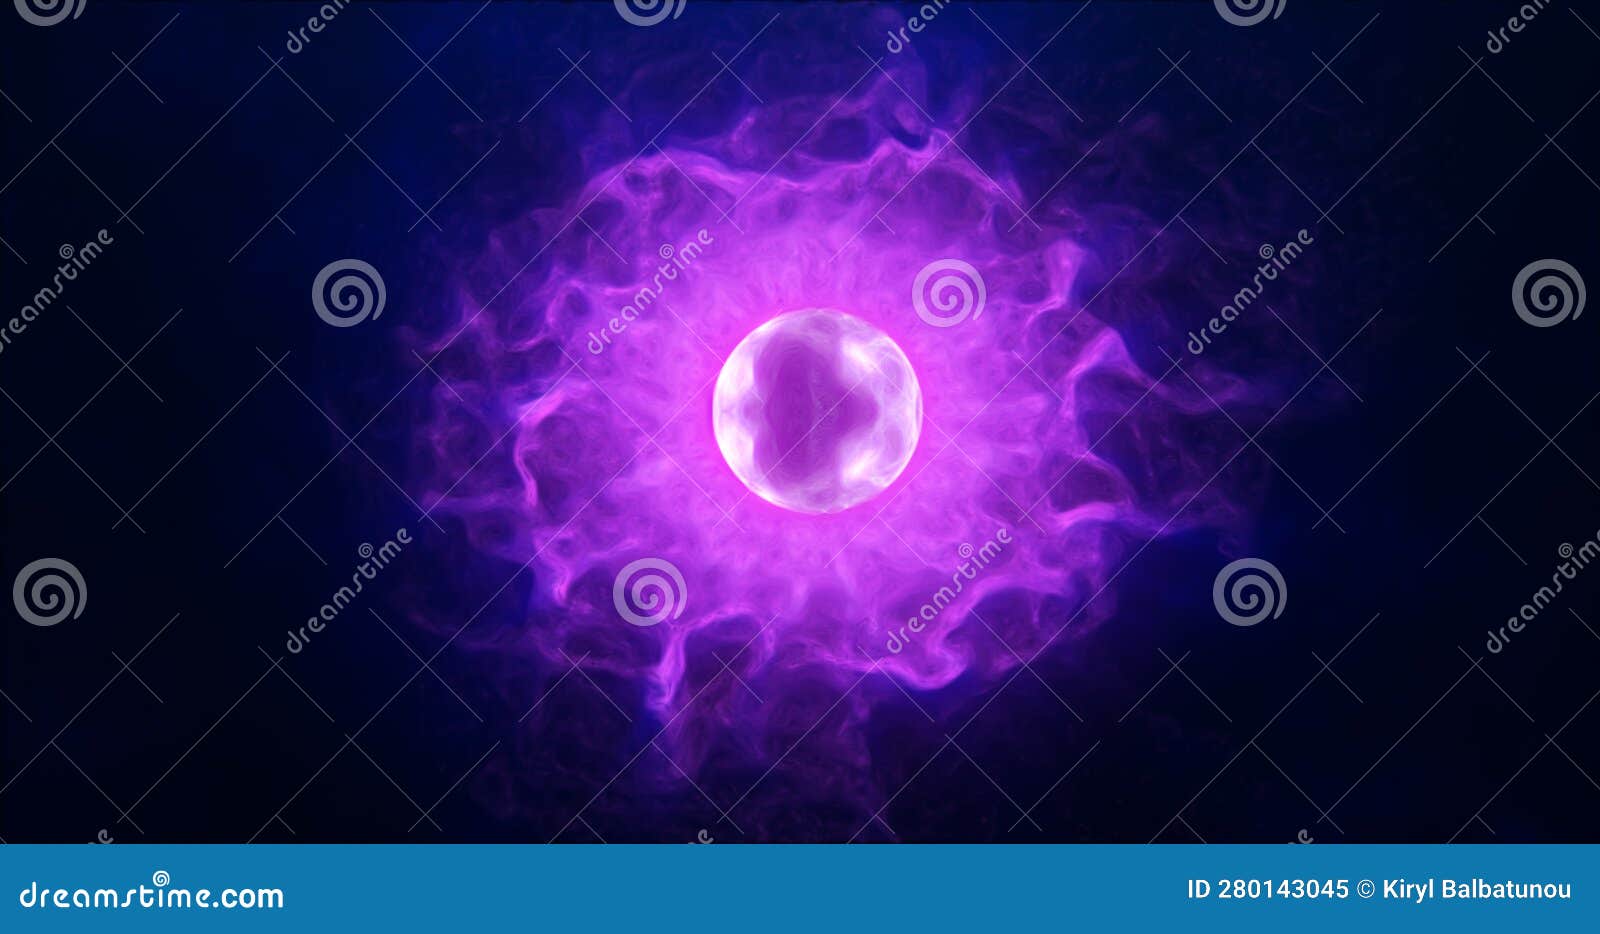 purple energy sphere with glowing bright particles, atom with electrons